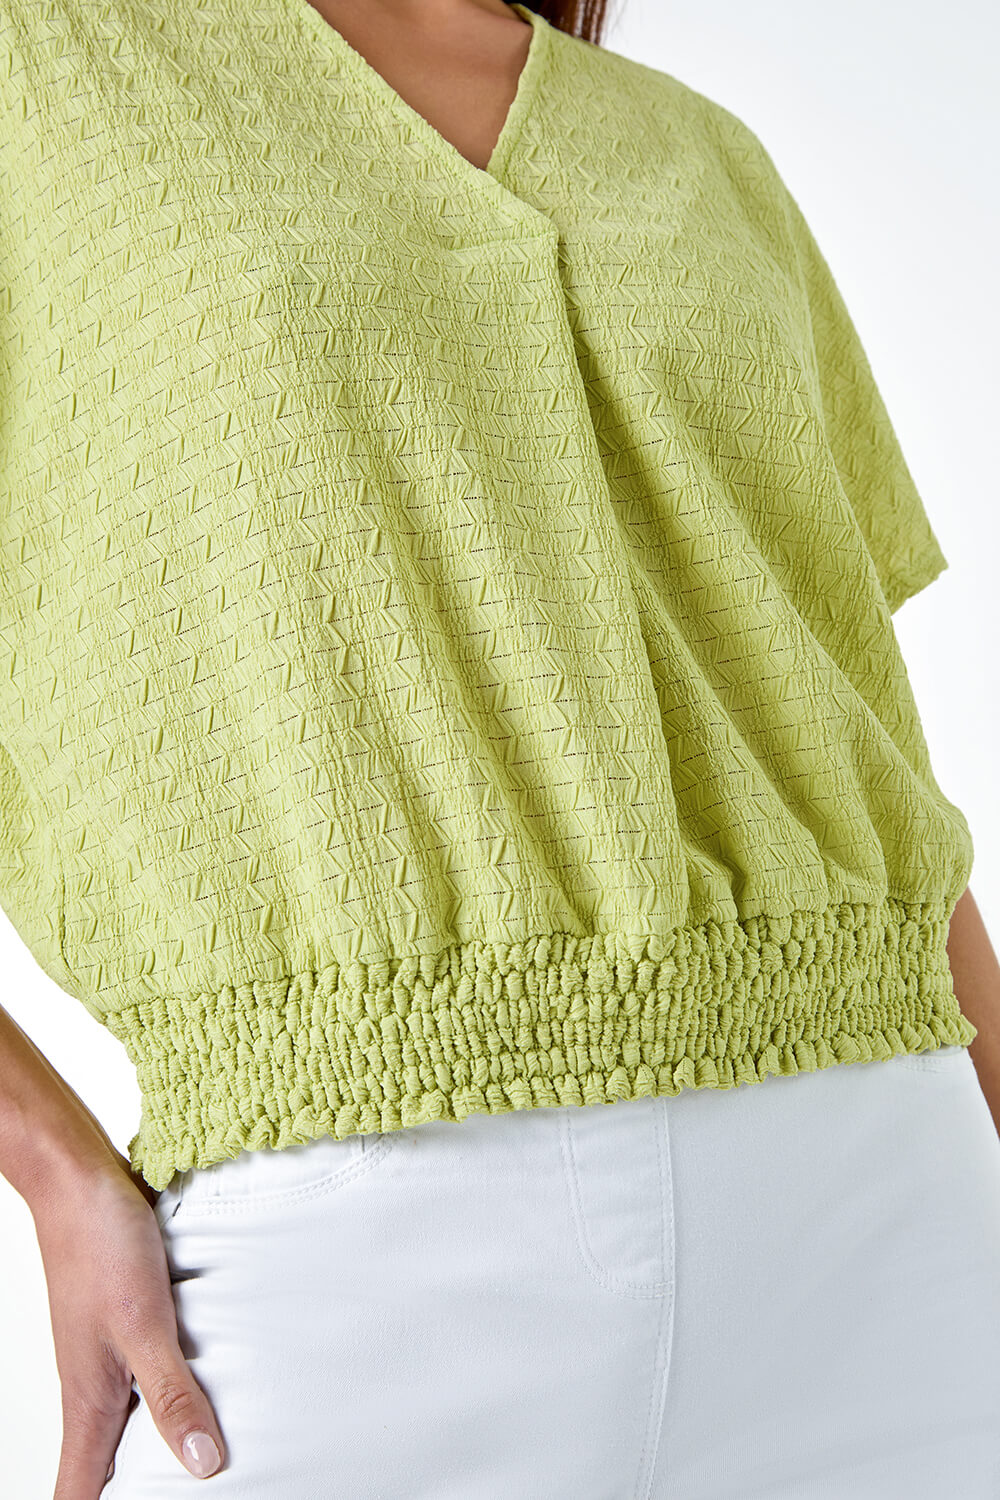 Sage Petite Textured Shirred Stretch Top, Image 5 of 5